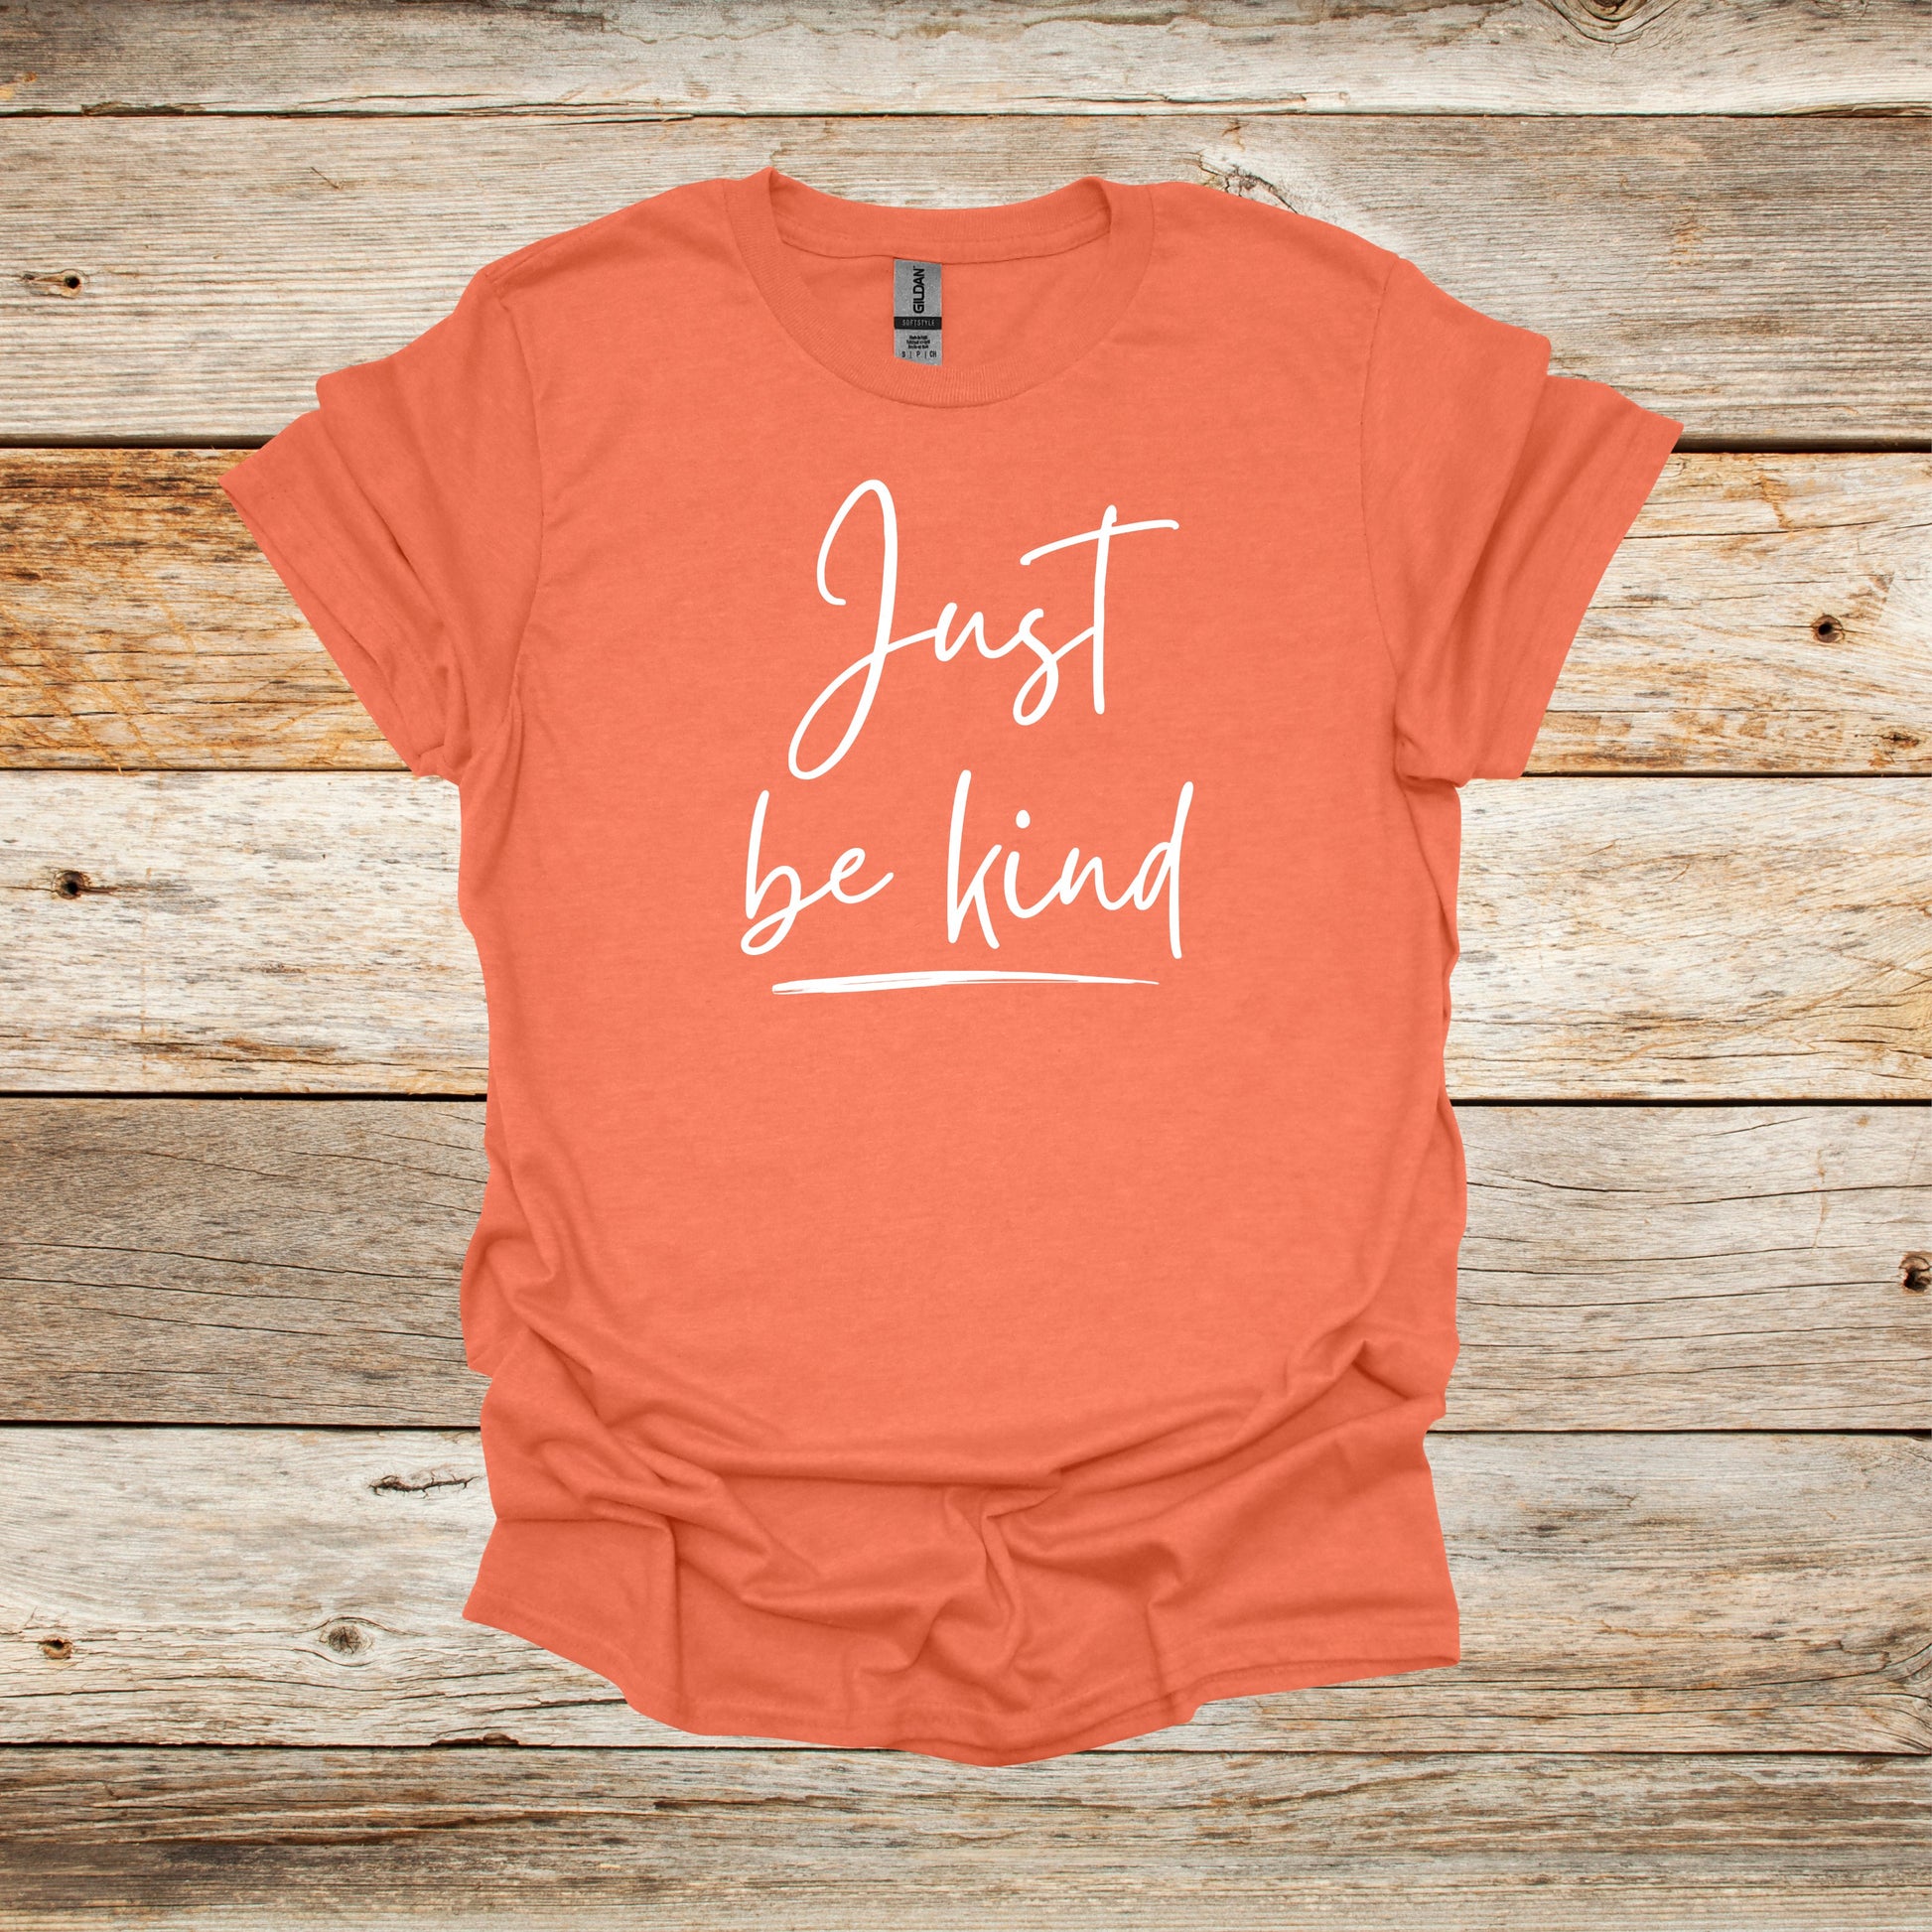 Sayings T-Shirt - Just Be Kind - Men's and Women's Tee Shirts - Sayings T-Shirts Graphic Avenue Heather Orange Adult Small 